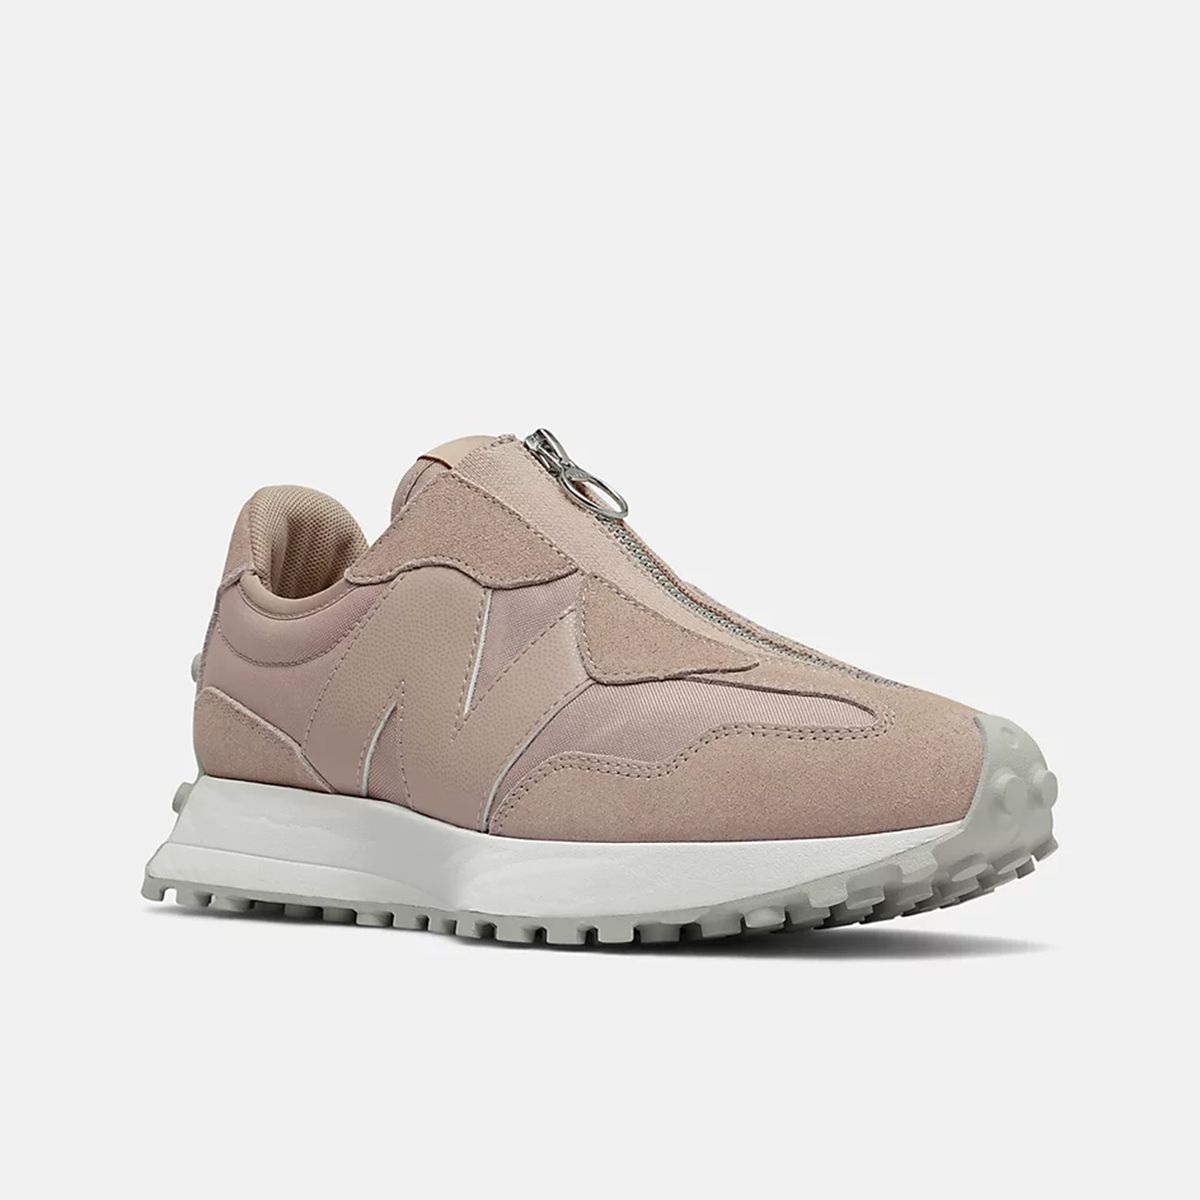 New Balance 327 Sneakers with Zipper in Au Lait